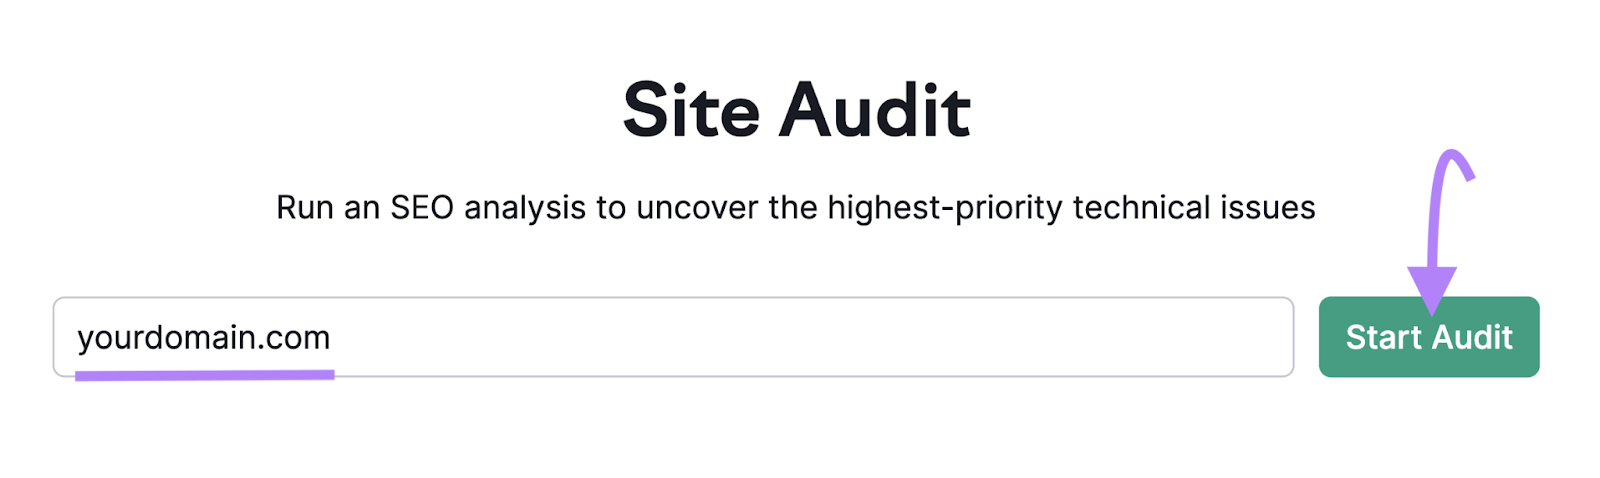 Search barroom  successful  the Site Audit tool